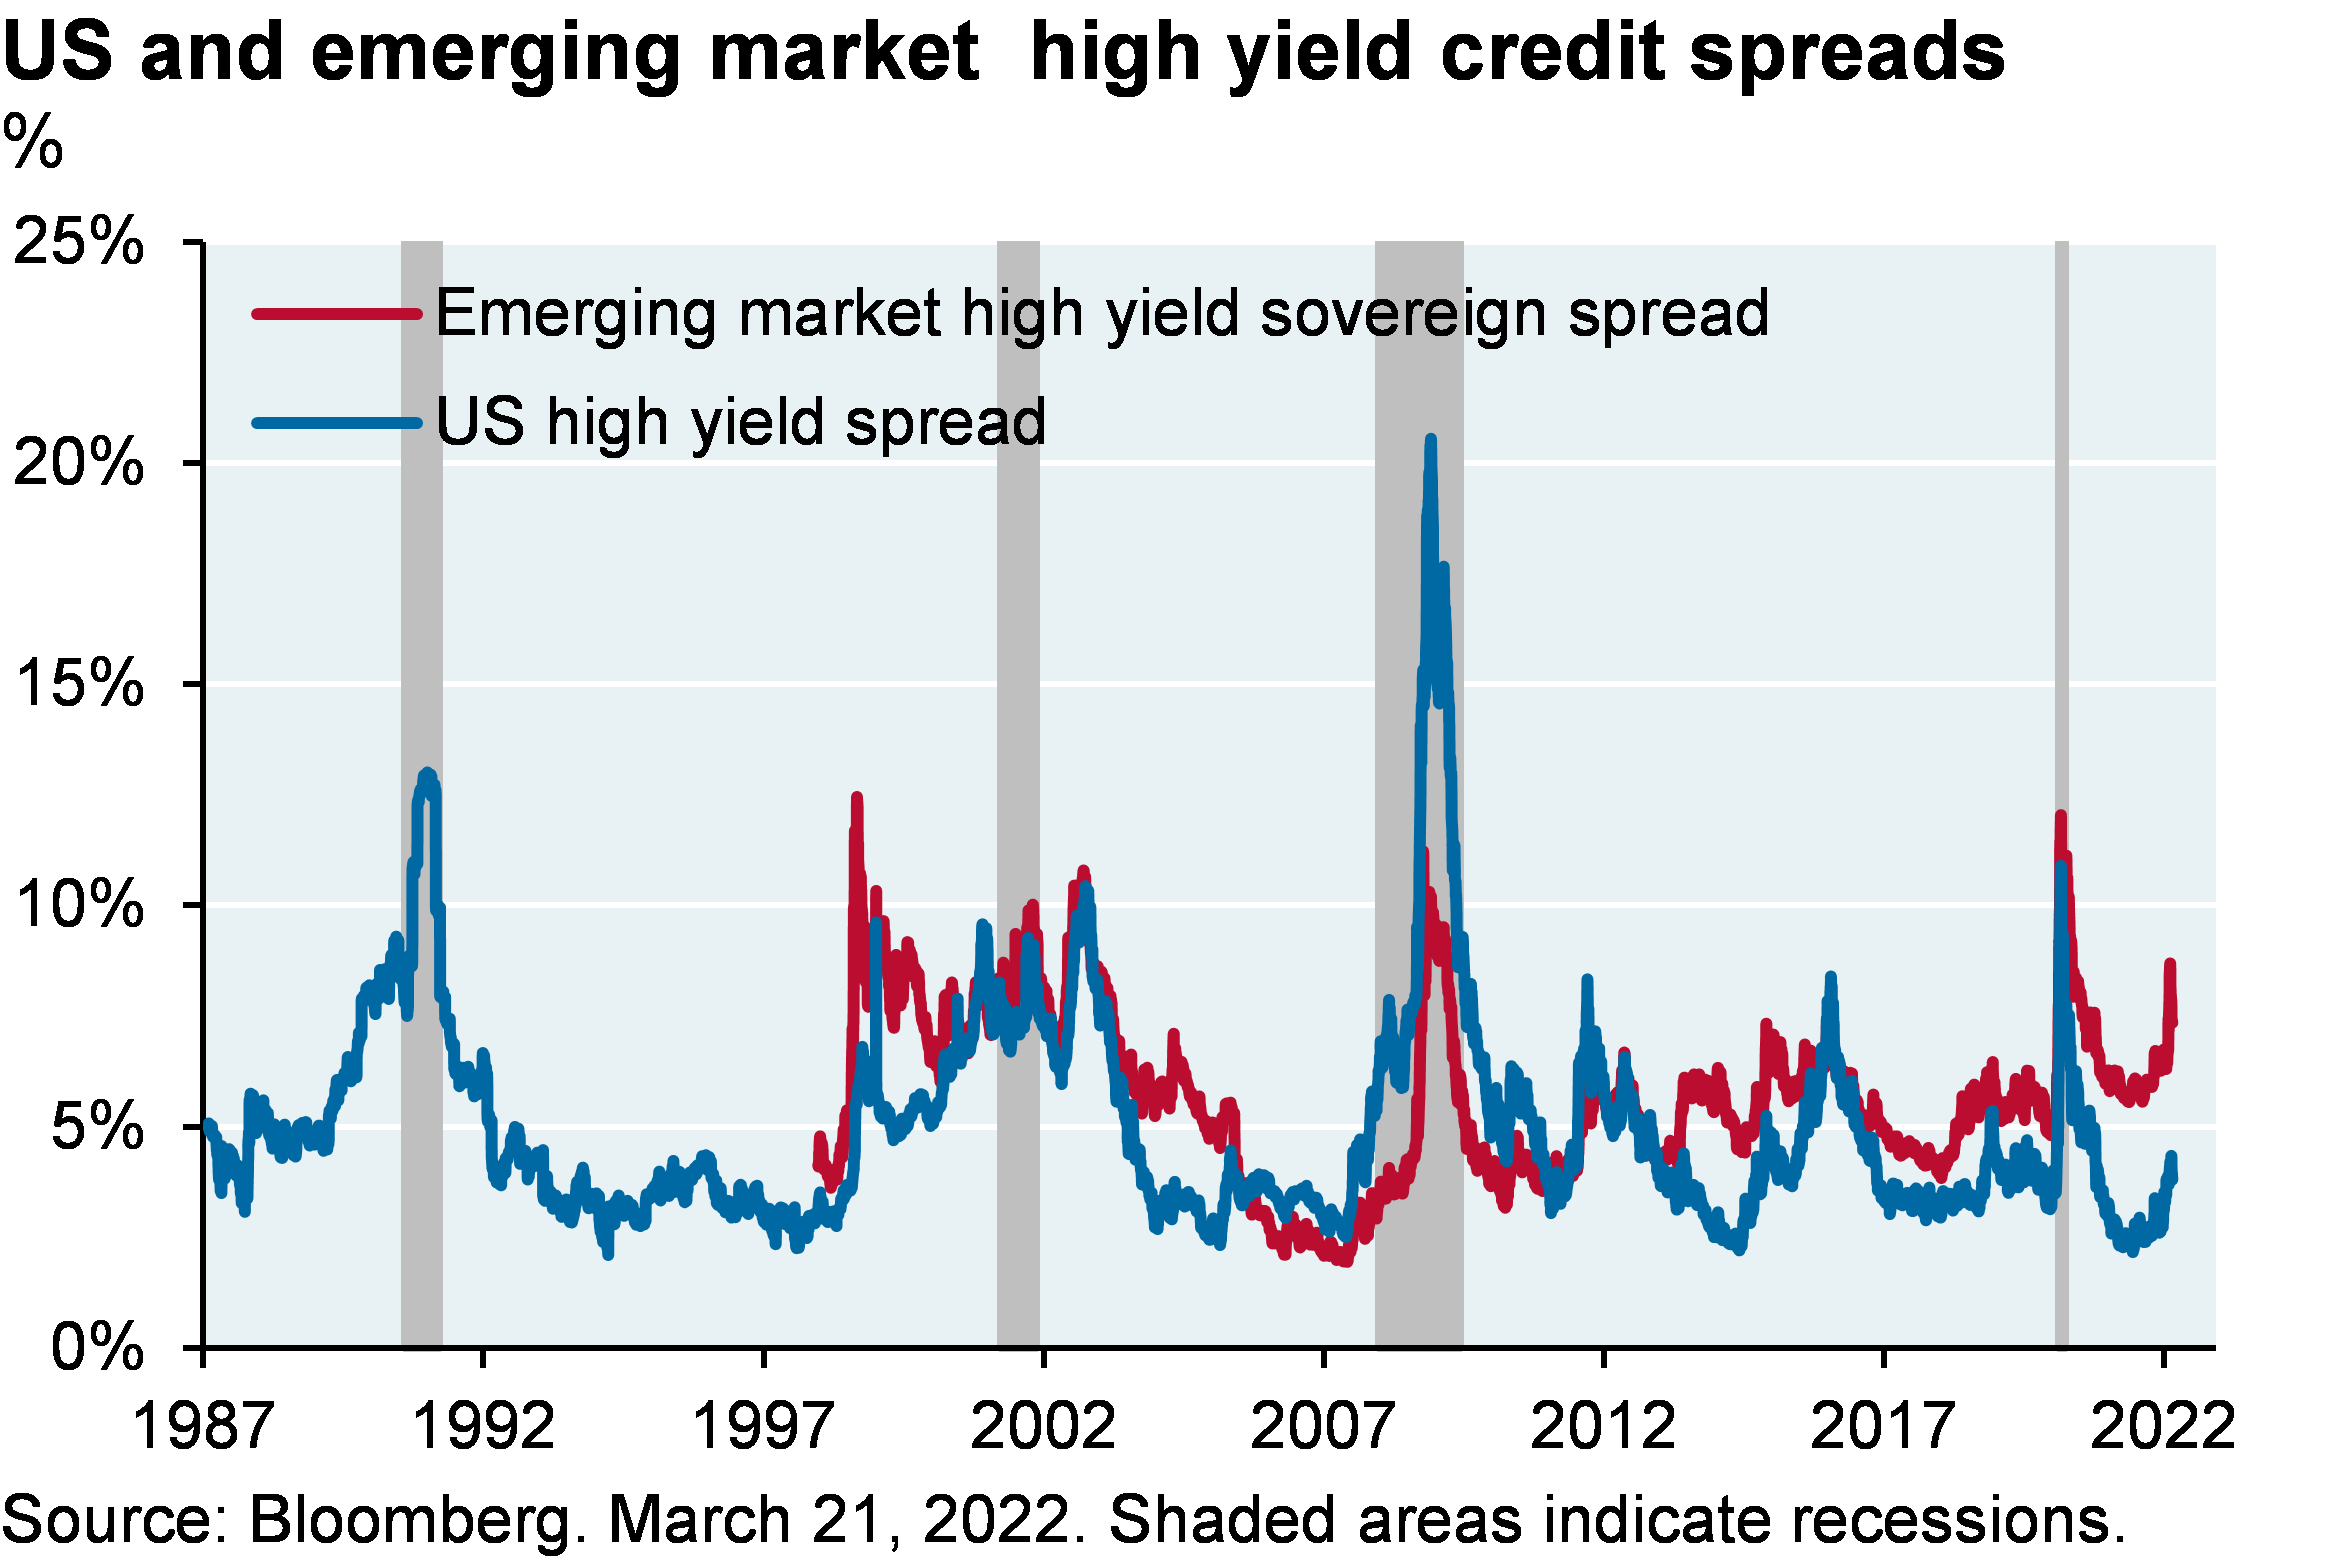 Line chart shows the high yield credit spreads in both the US and emerging market since 1987 and 1997. The chart shows that both credit spreads have widened at relatively the same pace. However, spreads are nowhere near levels seen in previous recessions (i.e., 2020, 2008, etc.) 